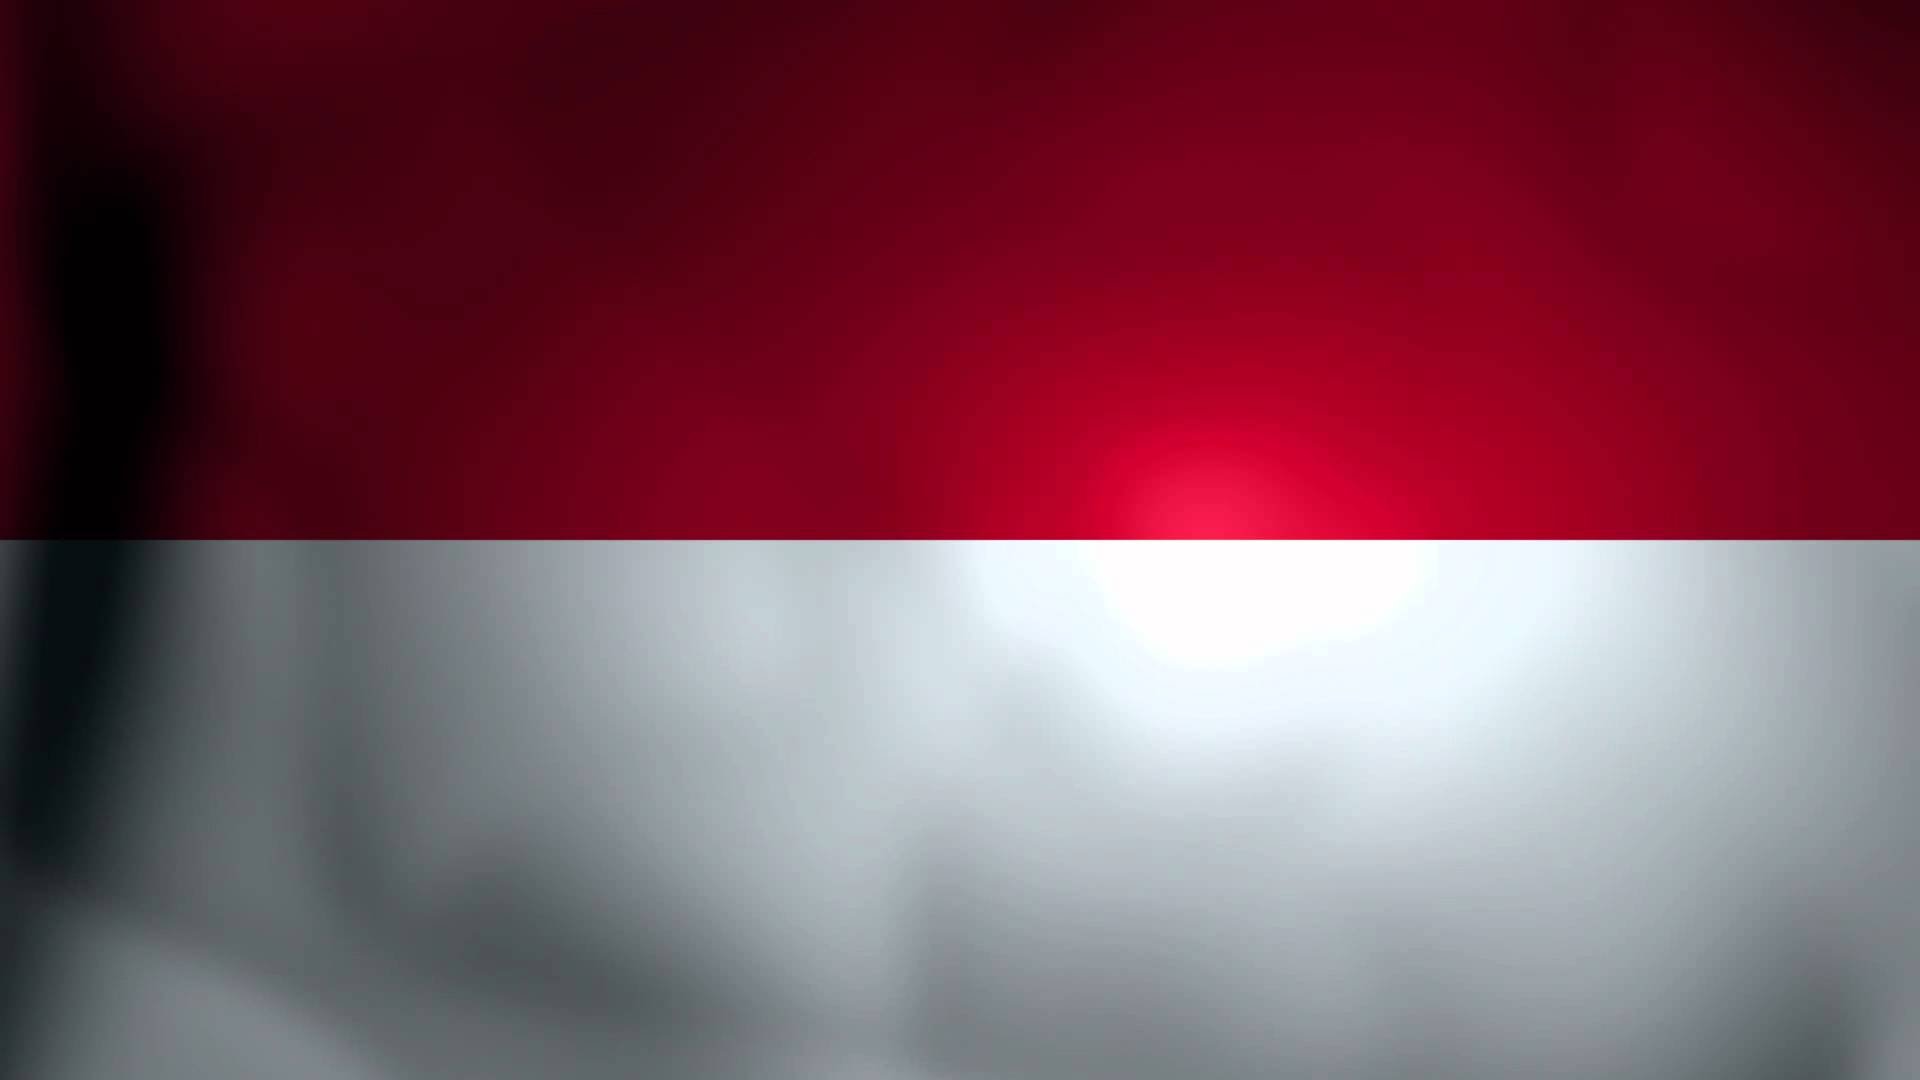 Indonesian Flag Indonesia Flags Wallpaper